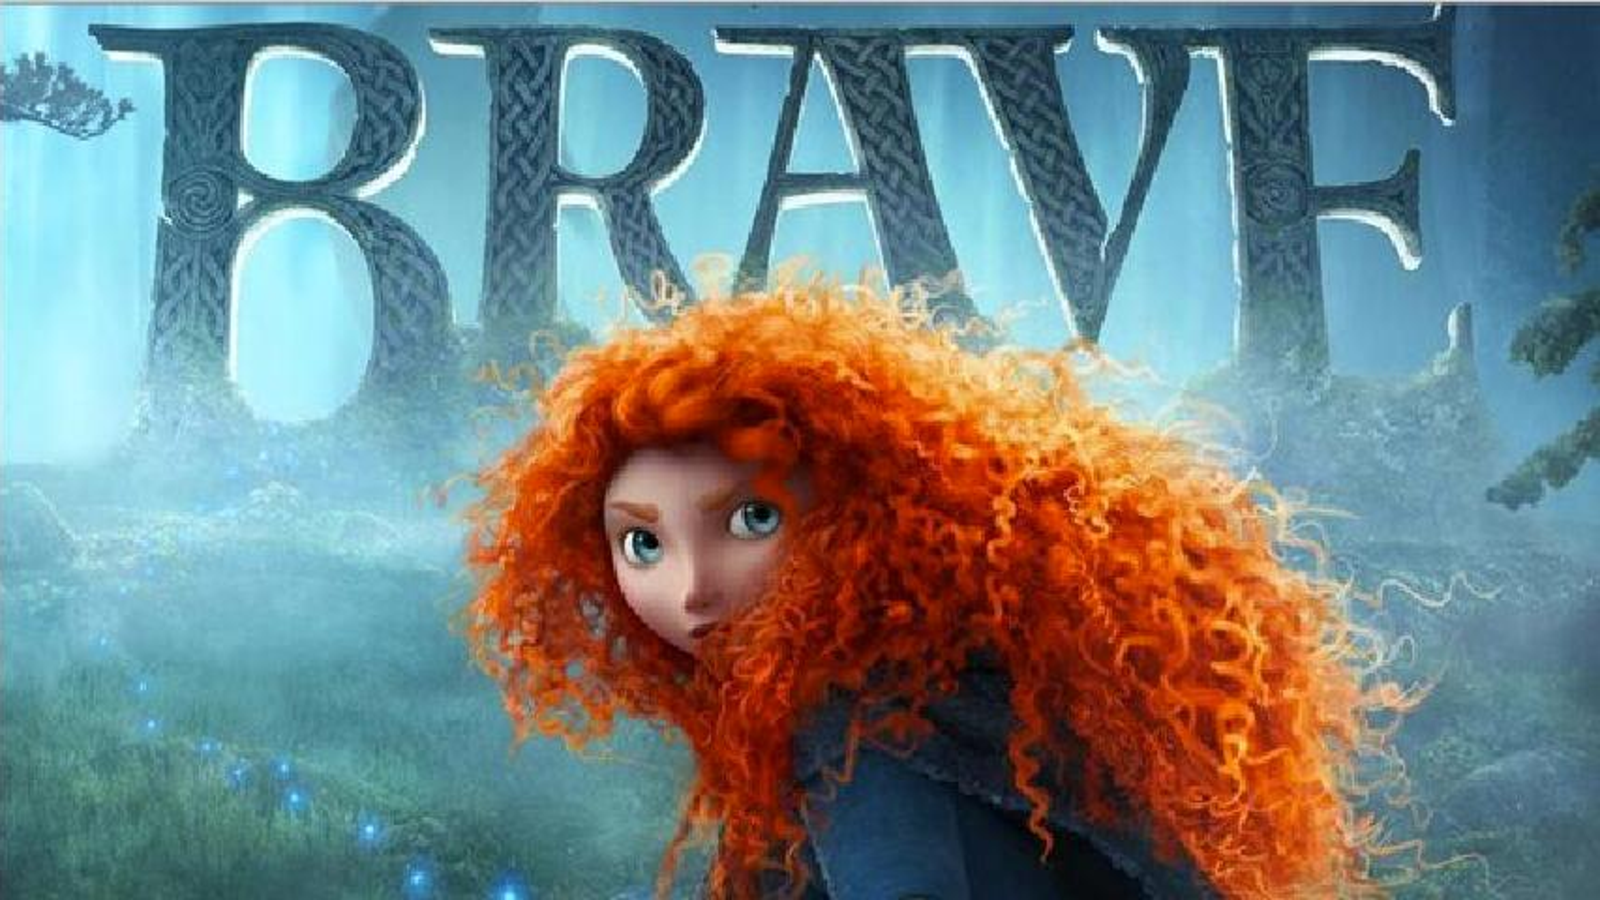 is there going to be a brave 2 movie